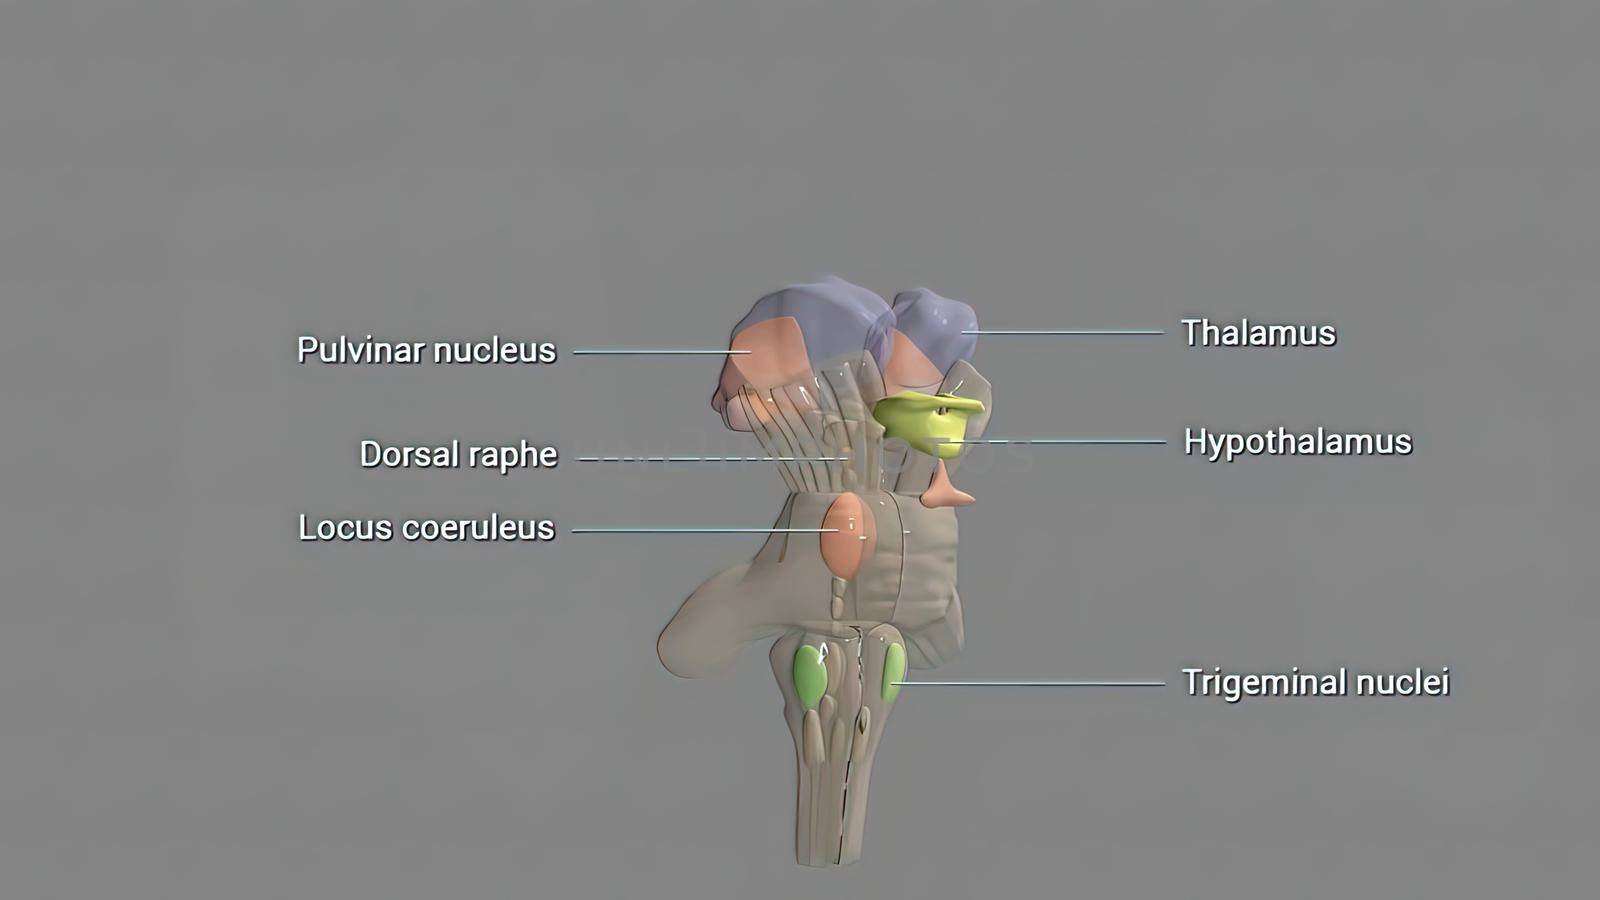 The hypothalamus, highlighted in red, is responsible for the homeostatic control of the body's metabolic, vascular, nervous and endocrine states 3d illustration